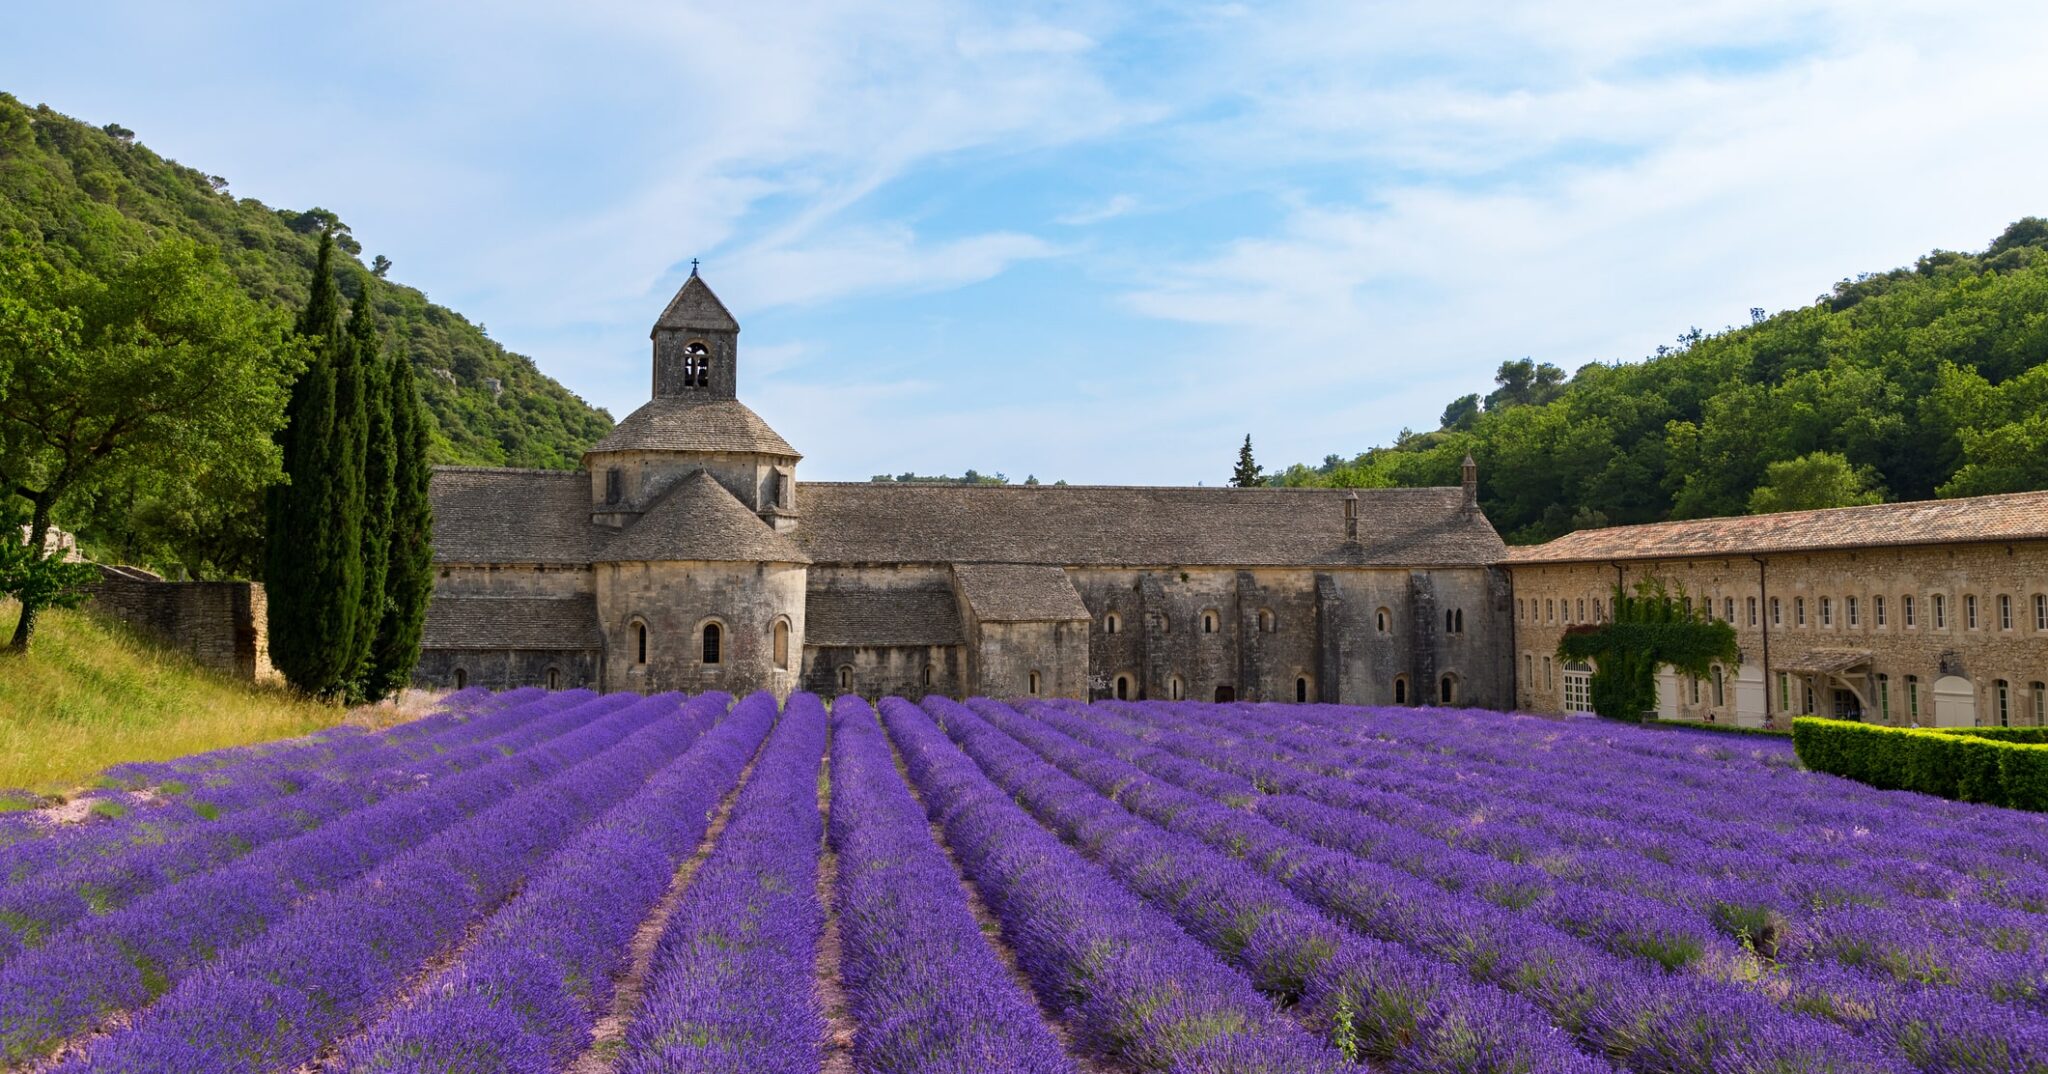 Senanque abbey with lavender fields in Lubéron, Provence region, France.